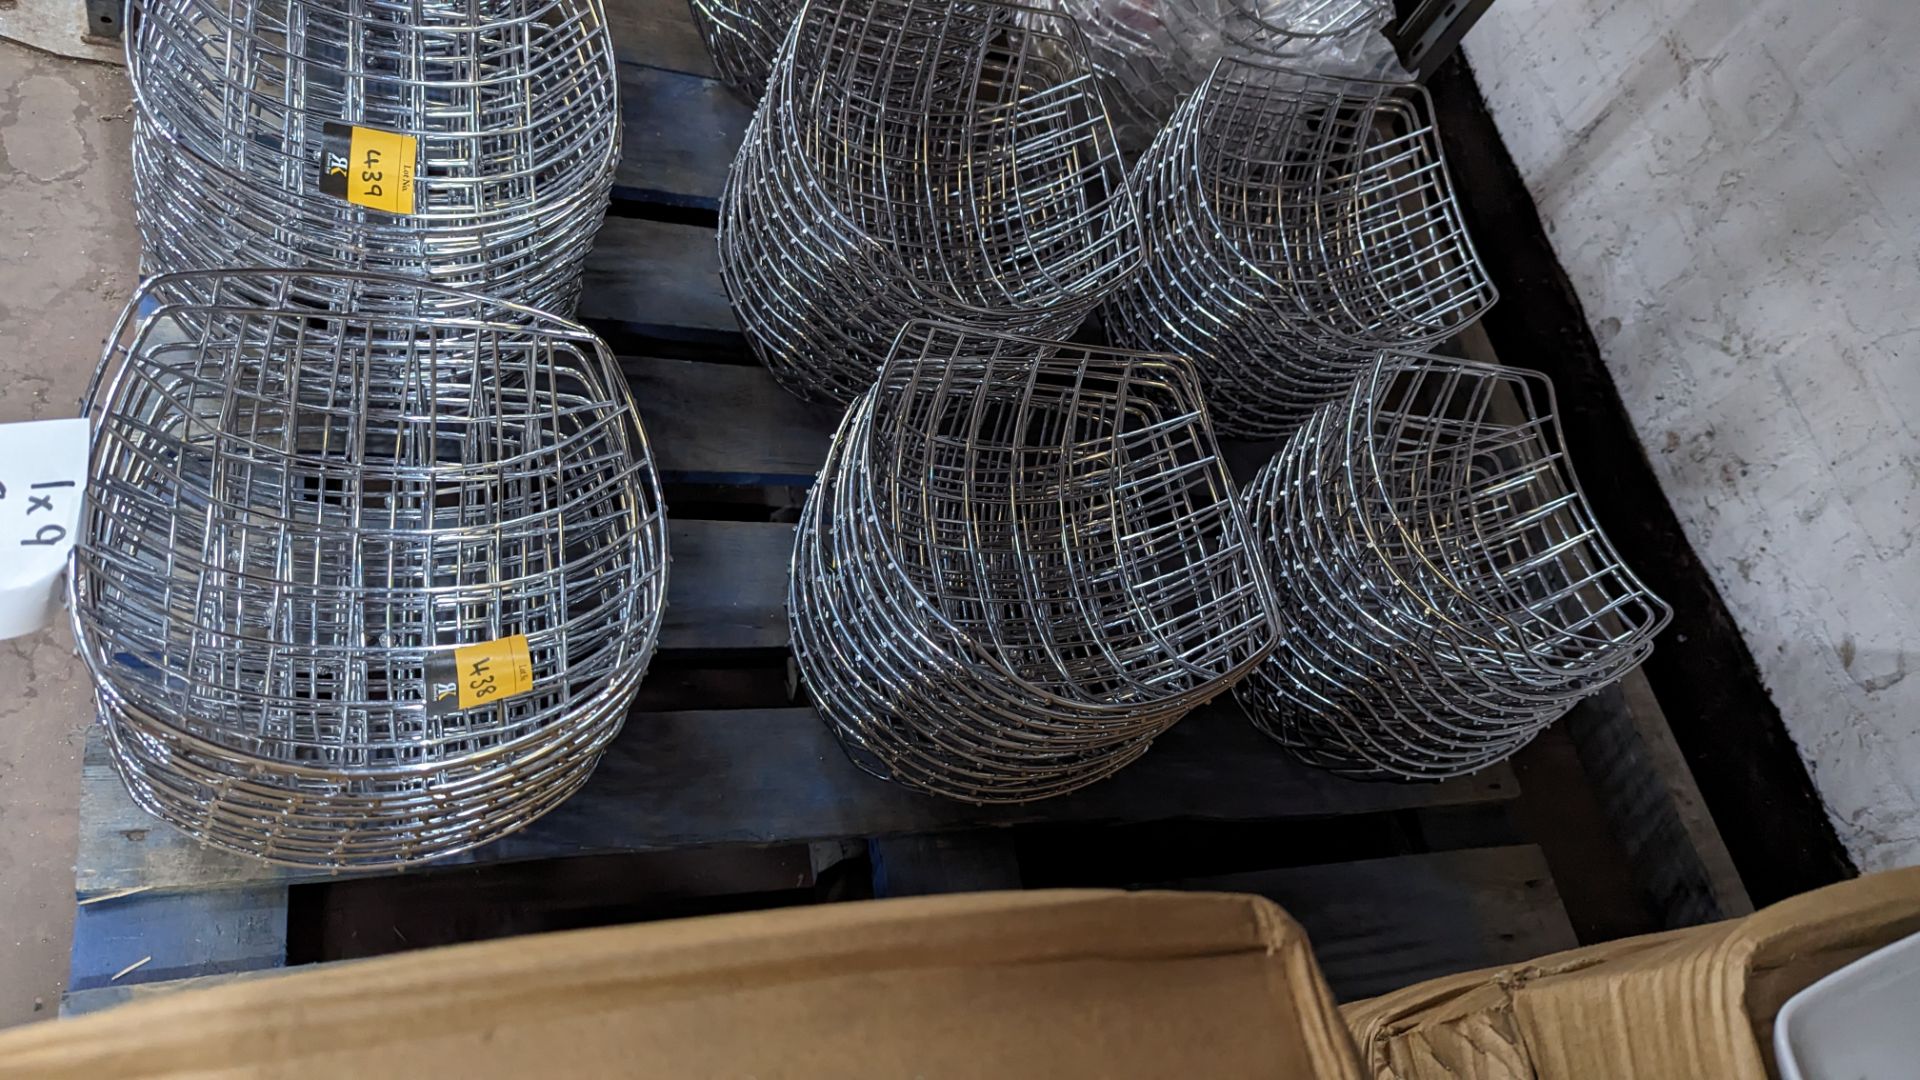 29 off chrome wire baskets each measuring approximately 240mm square - 3 stacks - Image 2 of 5